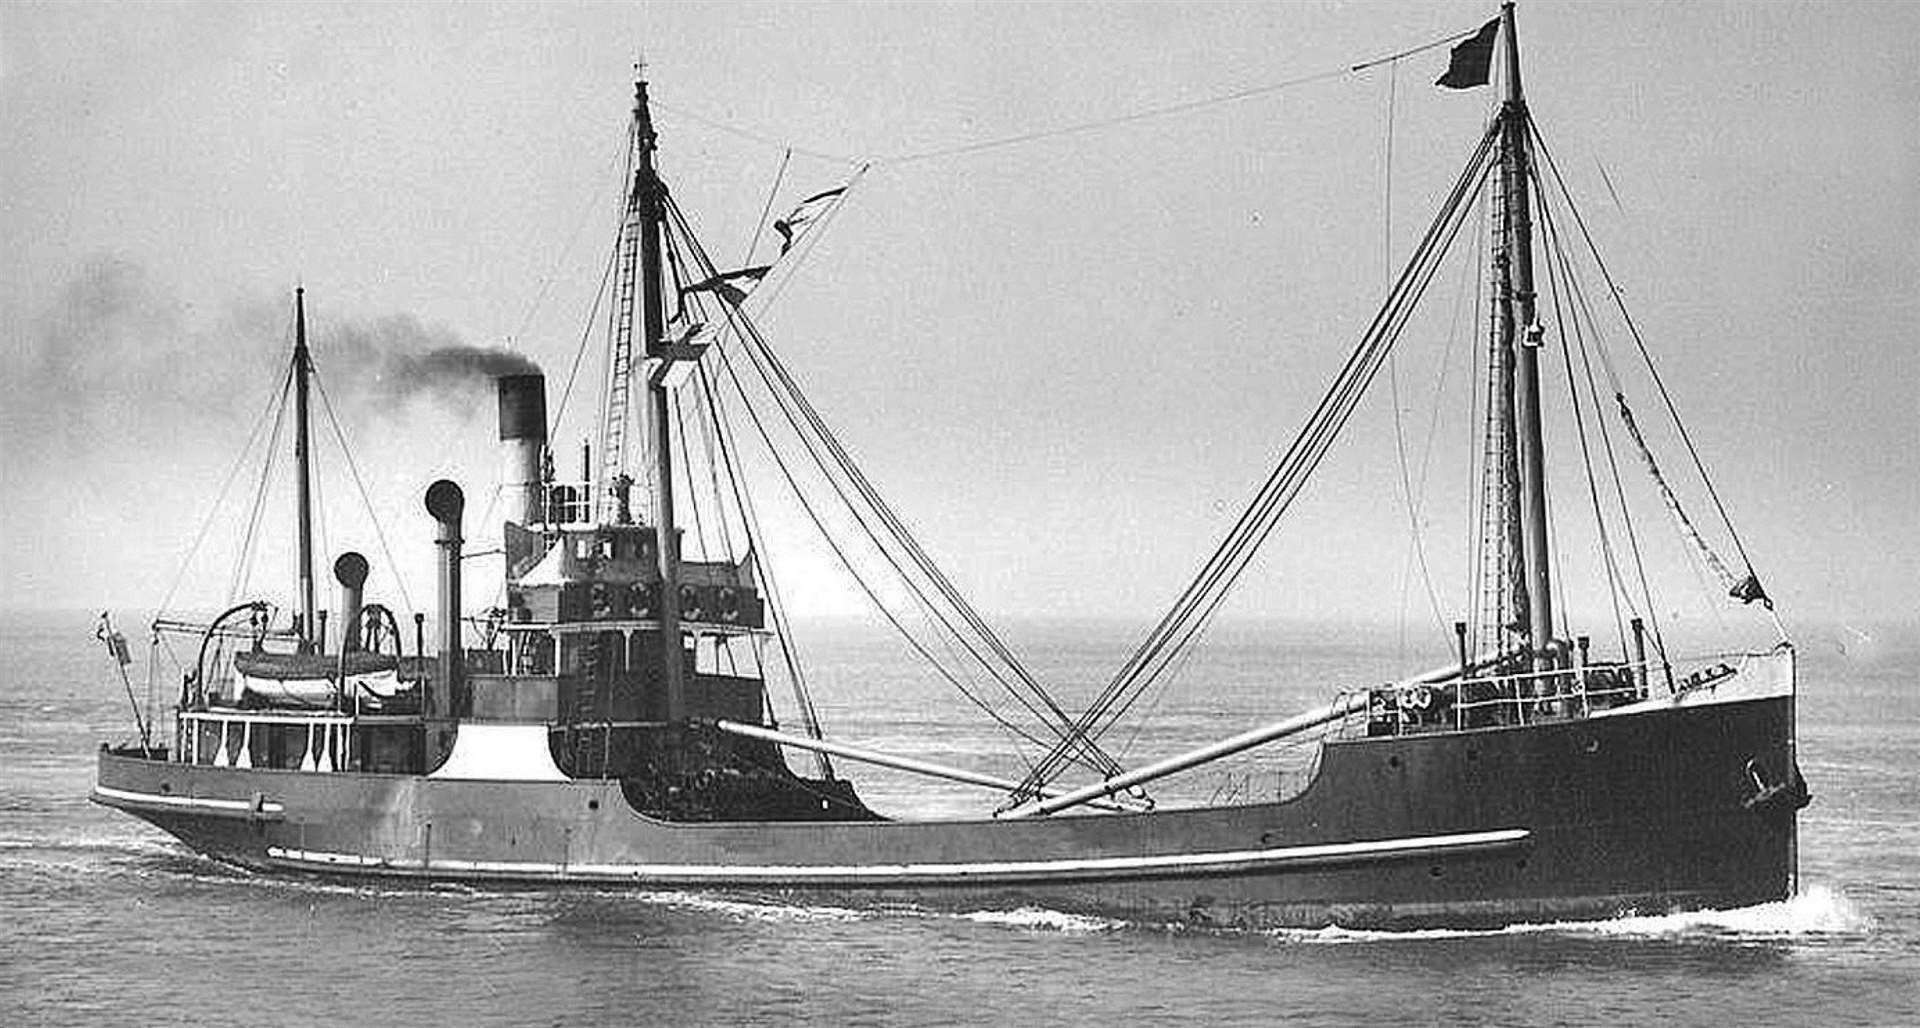 A rare photo of the Isleford which came to grief in a gale below Proudfoot in Wick Bay in January 1942 with the loss of all 14 of its crew. The 150ft coaster, which had been requisitioned to ferry munitions and other supplies on east coast routes, ran into difficulties after developing engine trouble and was driven onto rocks.